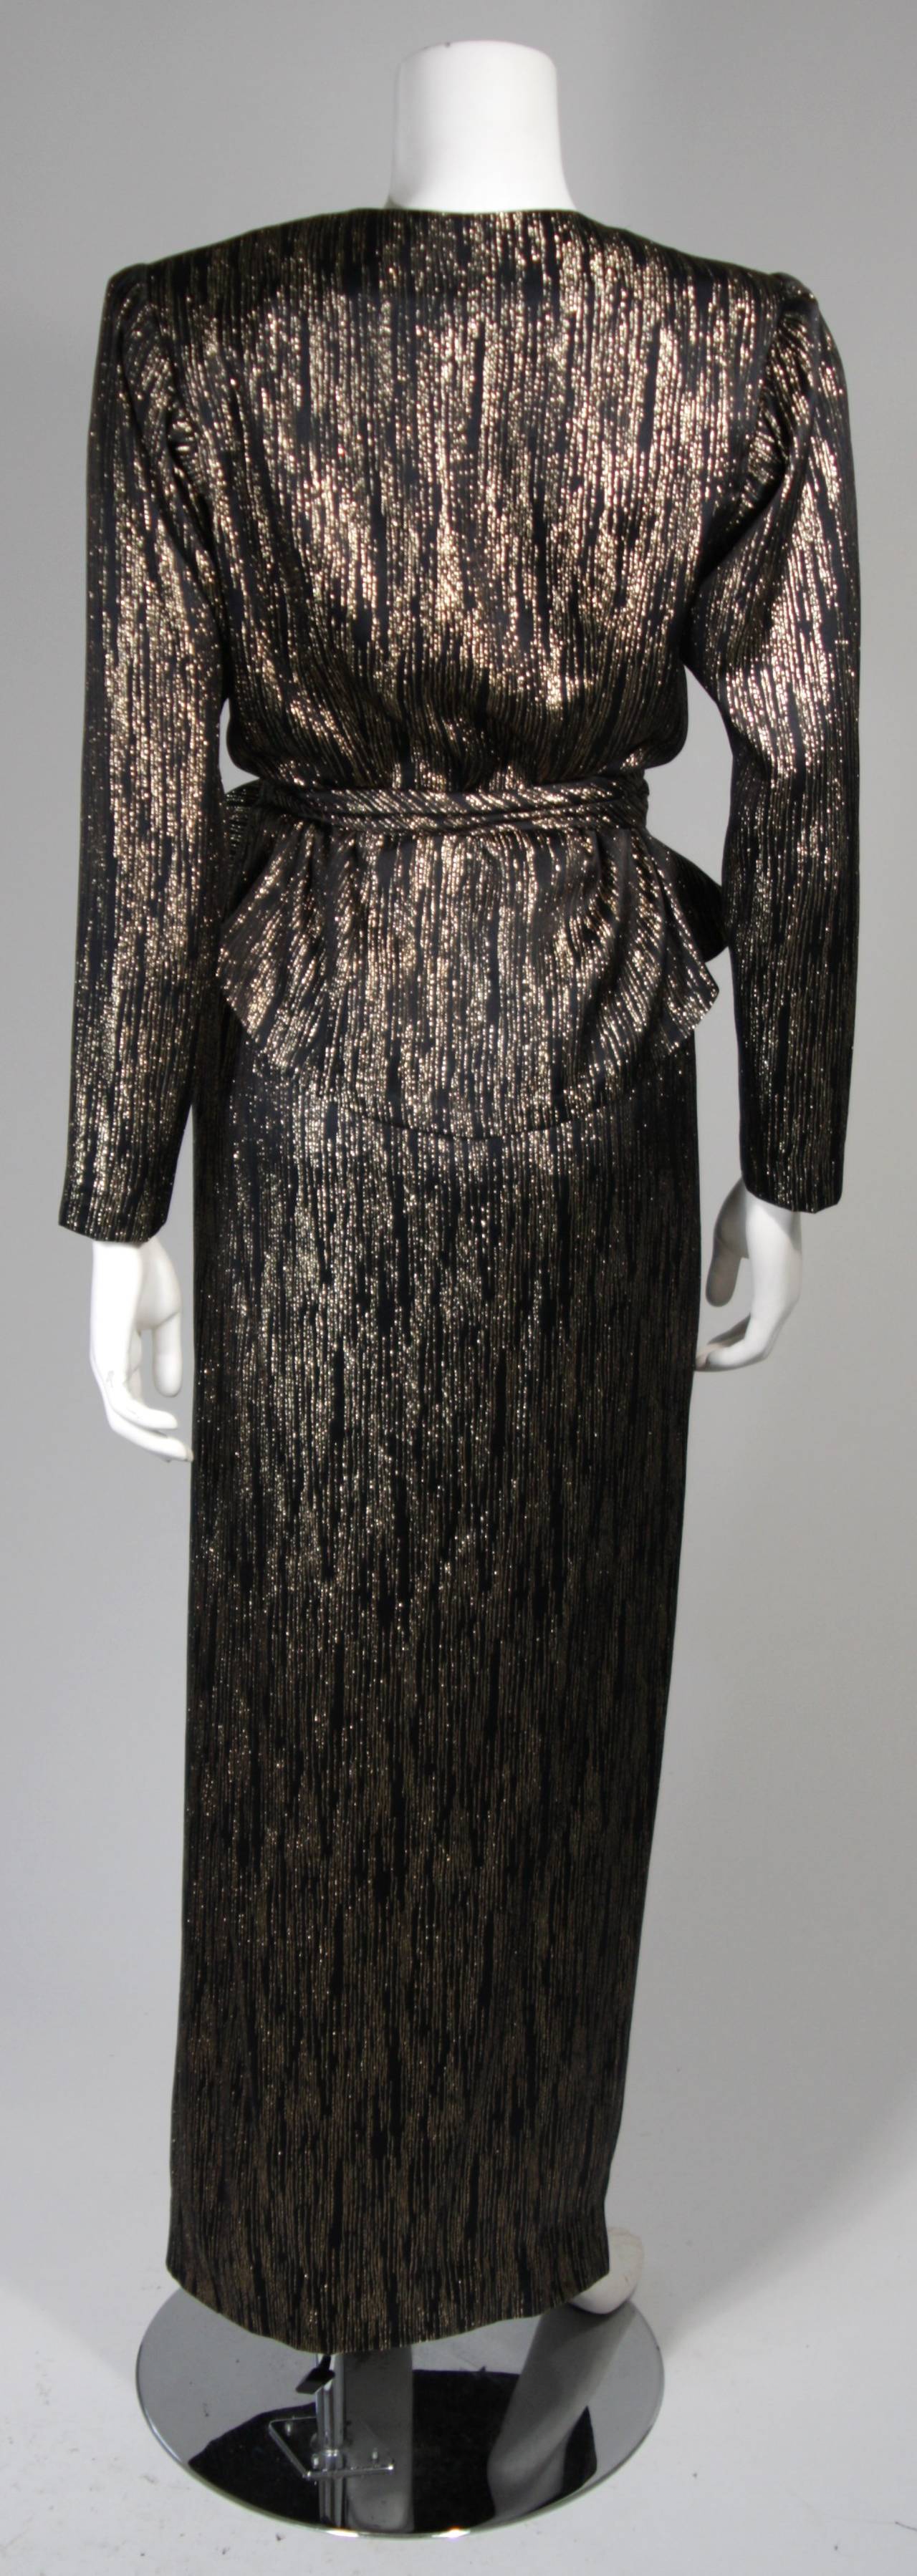 Nolan Miller Attributed Black and Gold Lame Ensemble Size Small 2